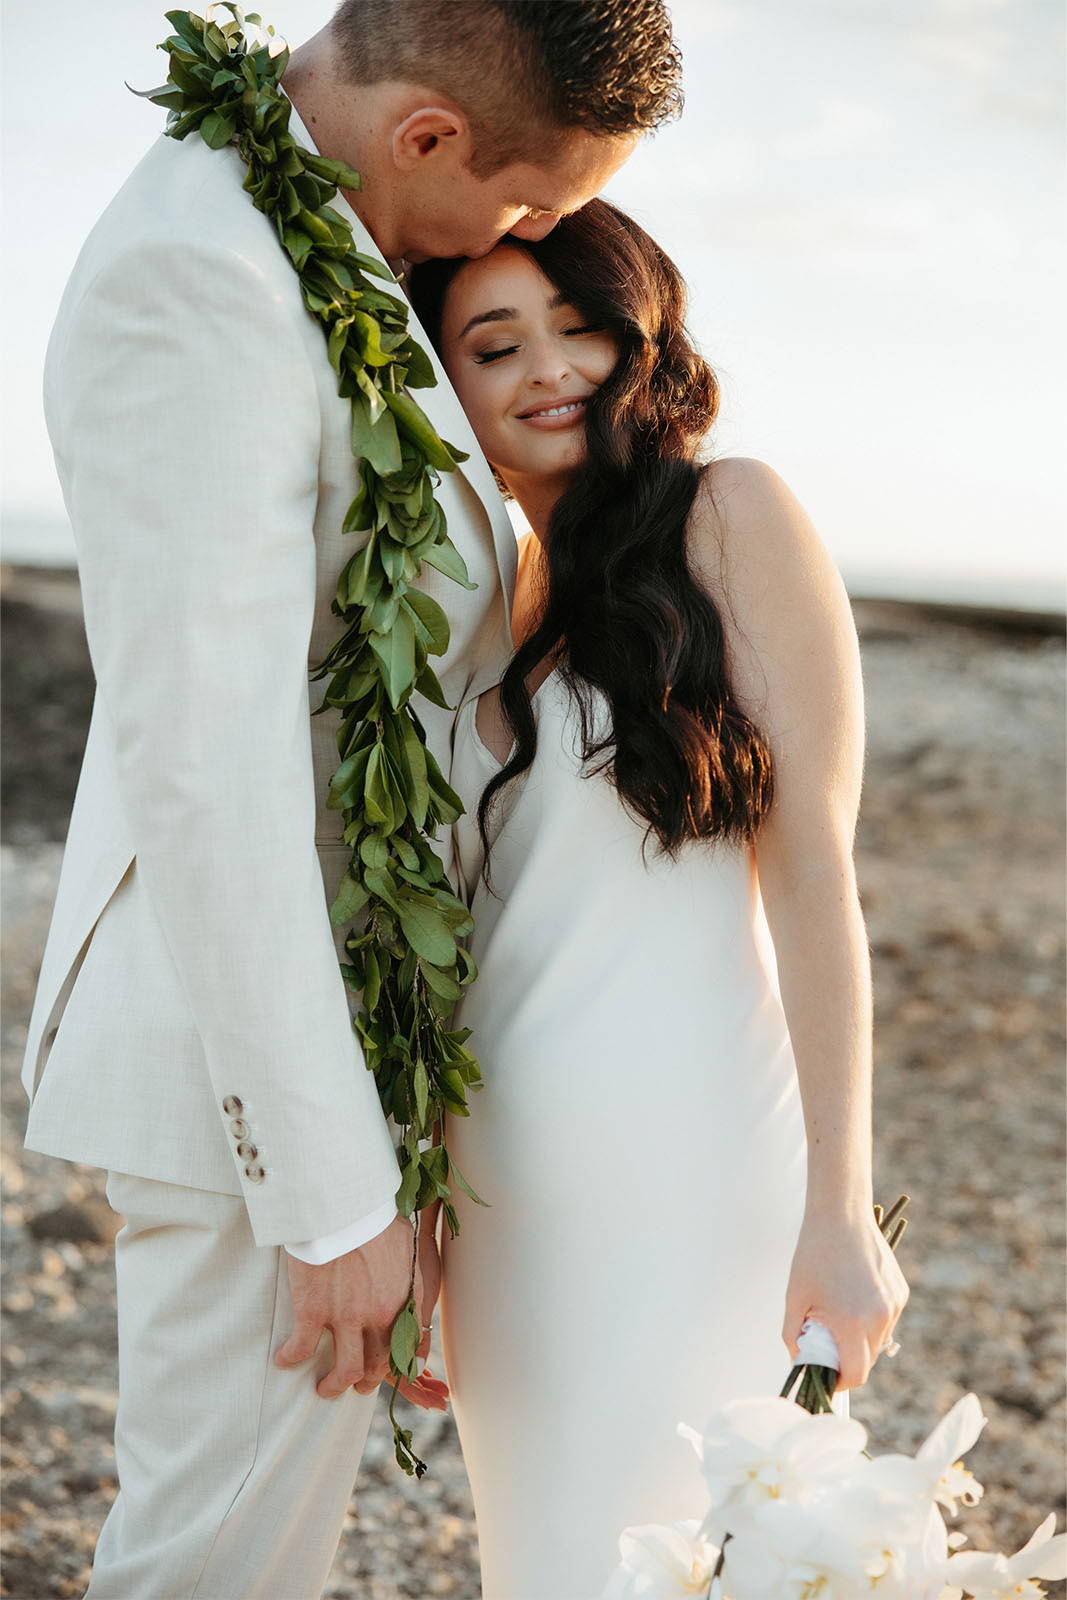 Groom with leafy lei on shoulders